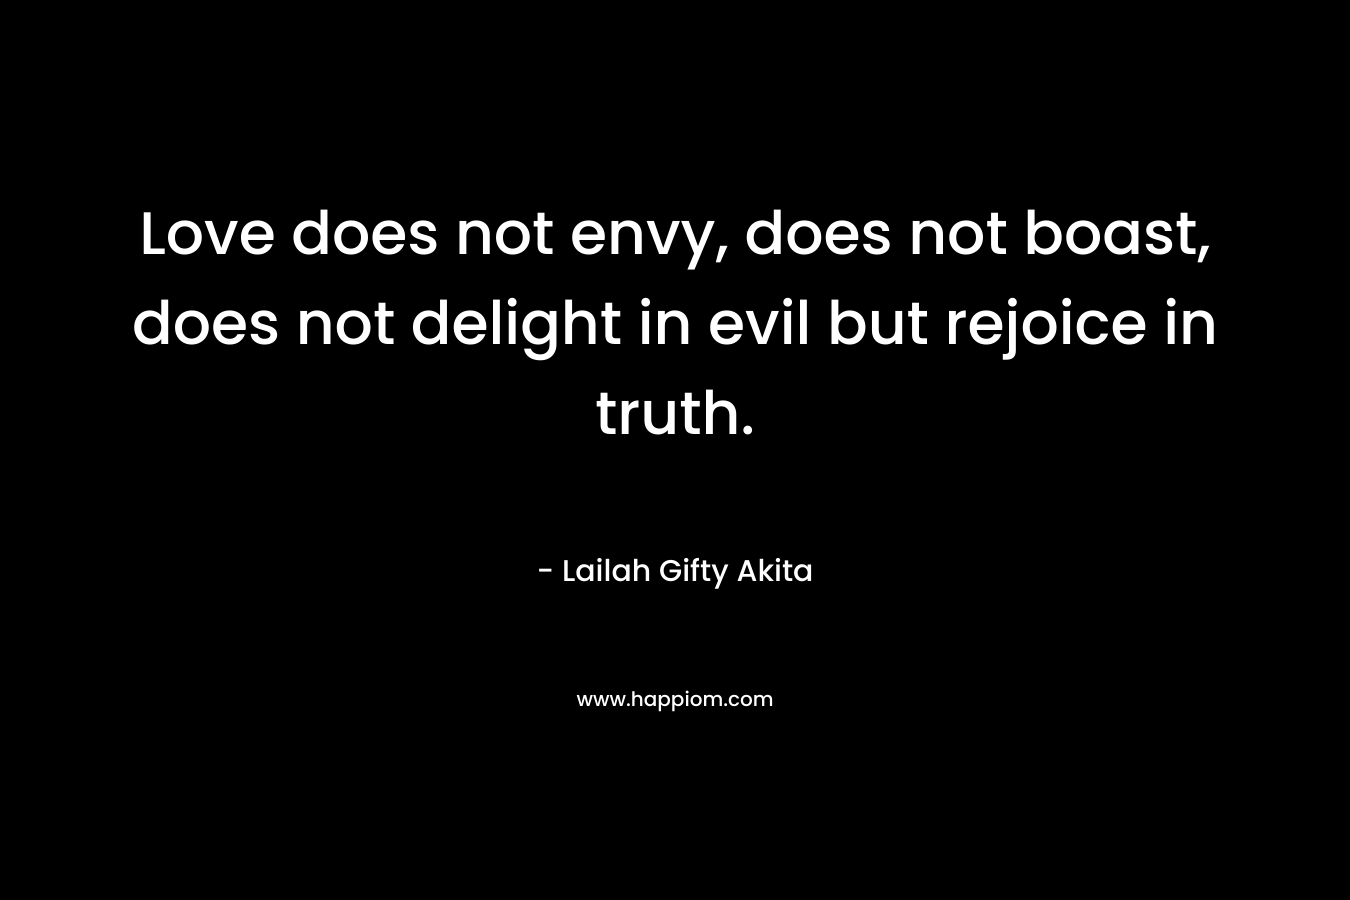 Love does not envy, does not boast, does not delight in evil but rejoice in truth. – Lailah Gifty Akita